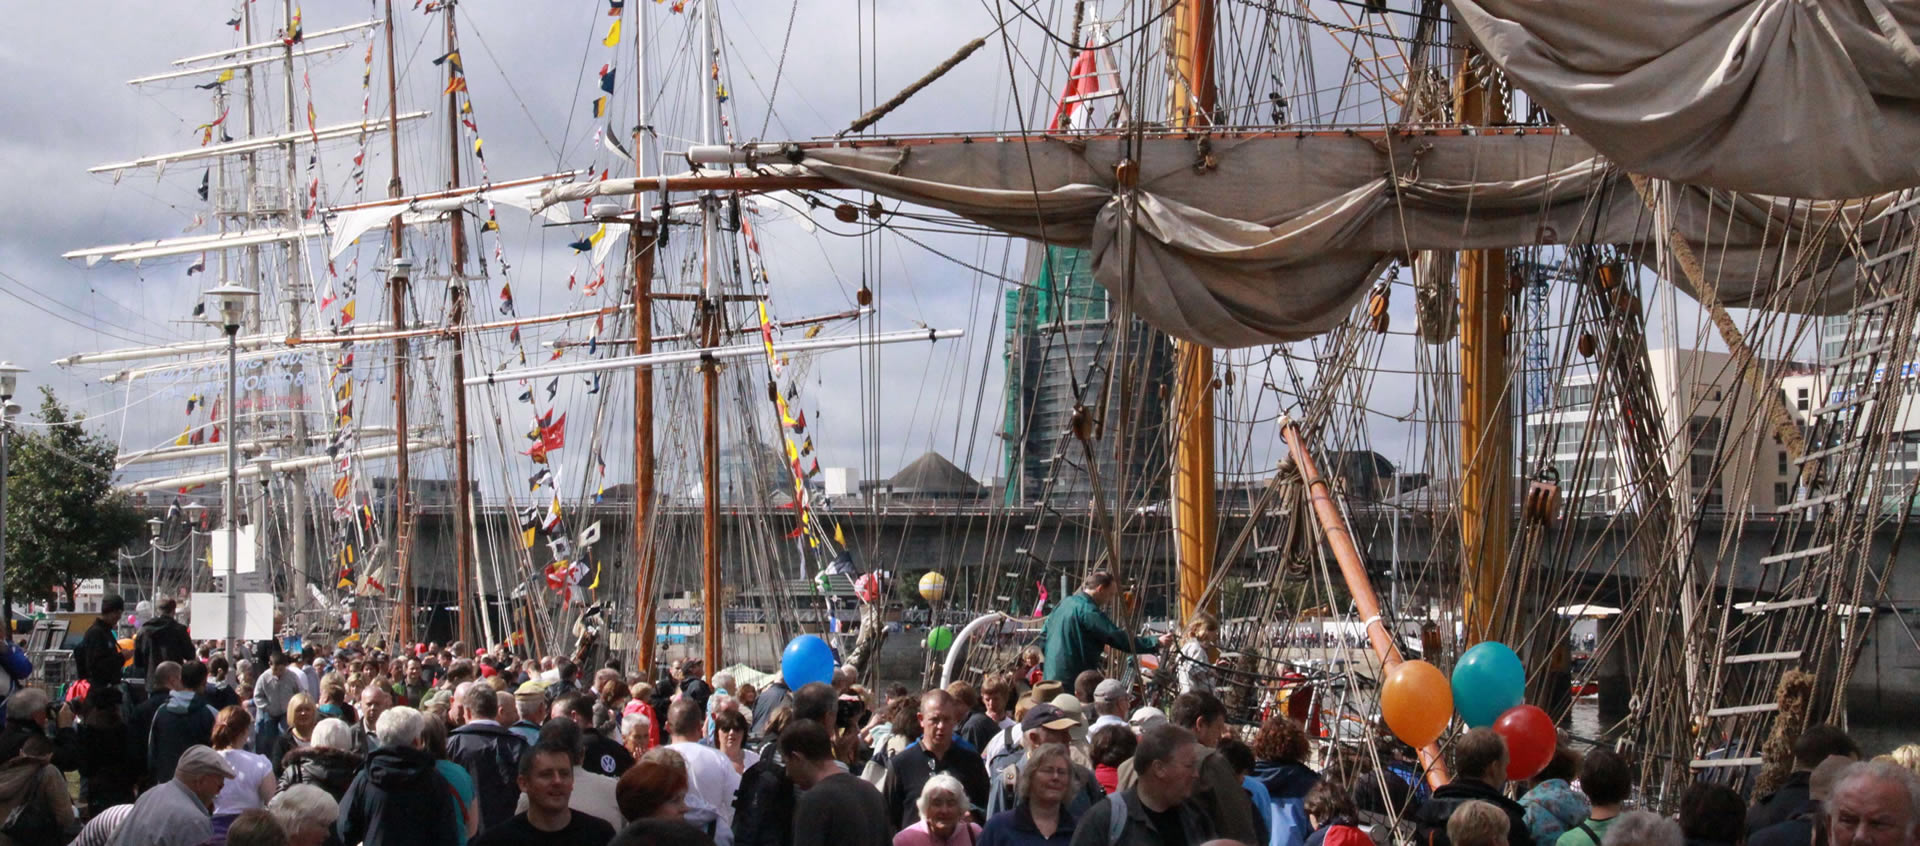 A rare chance to see tall ships and Navy ships in New Orleans